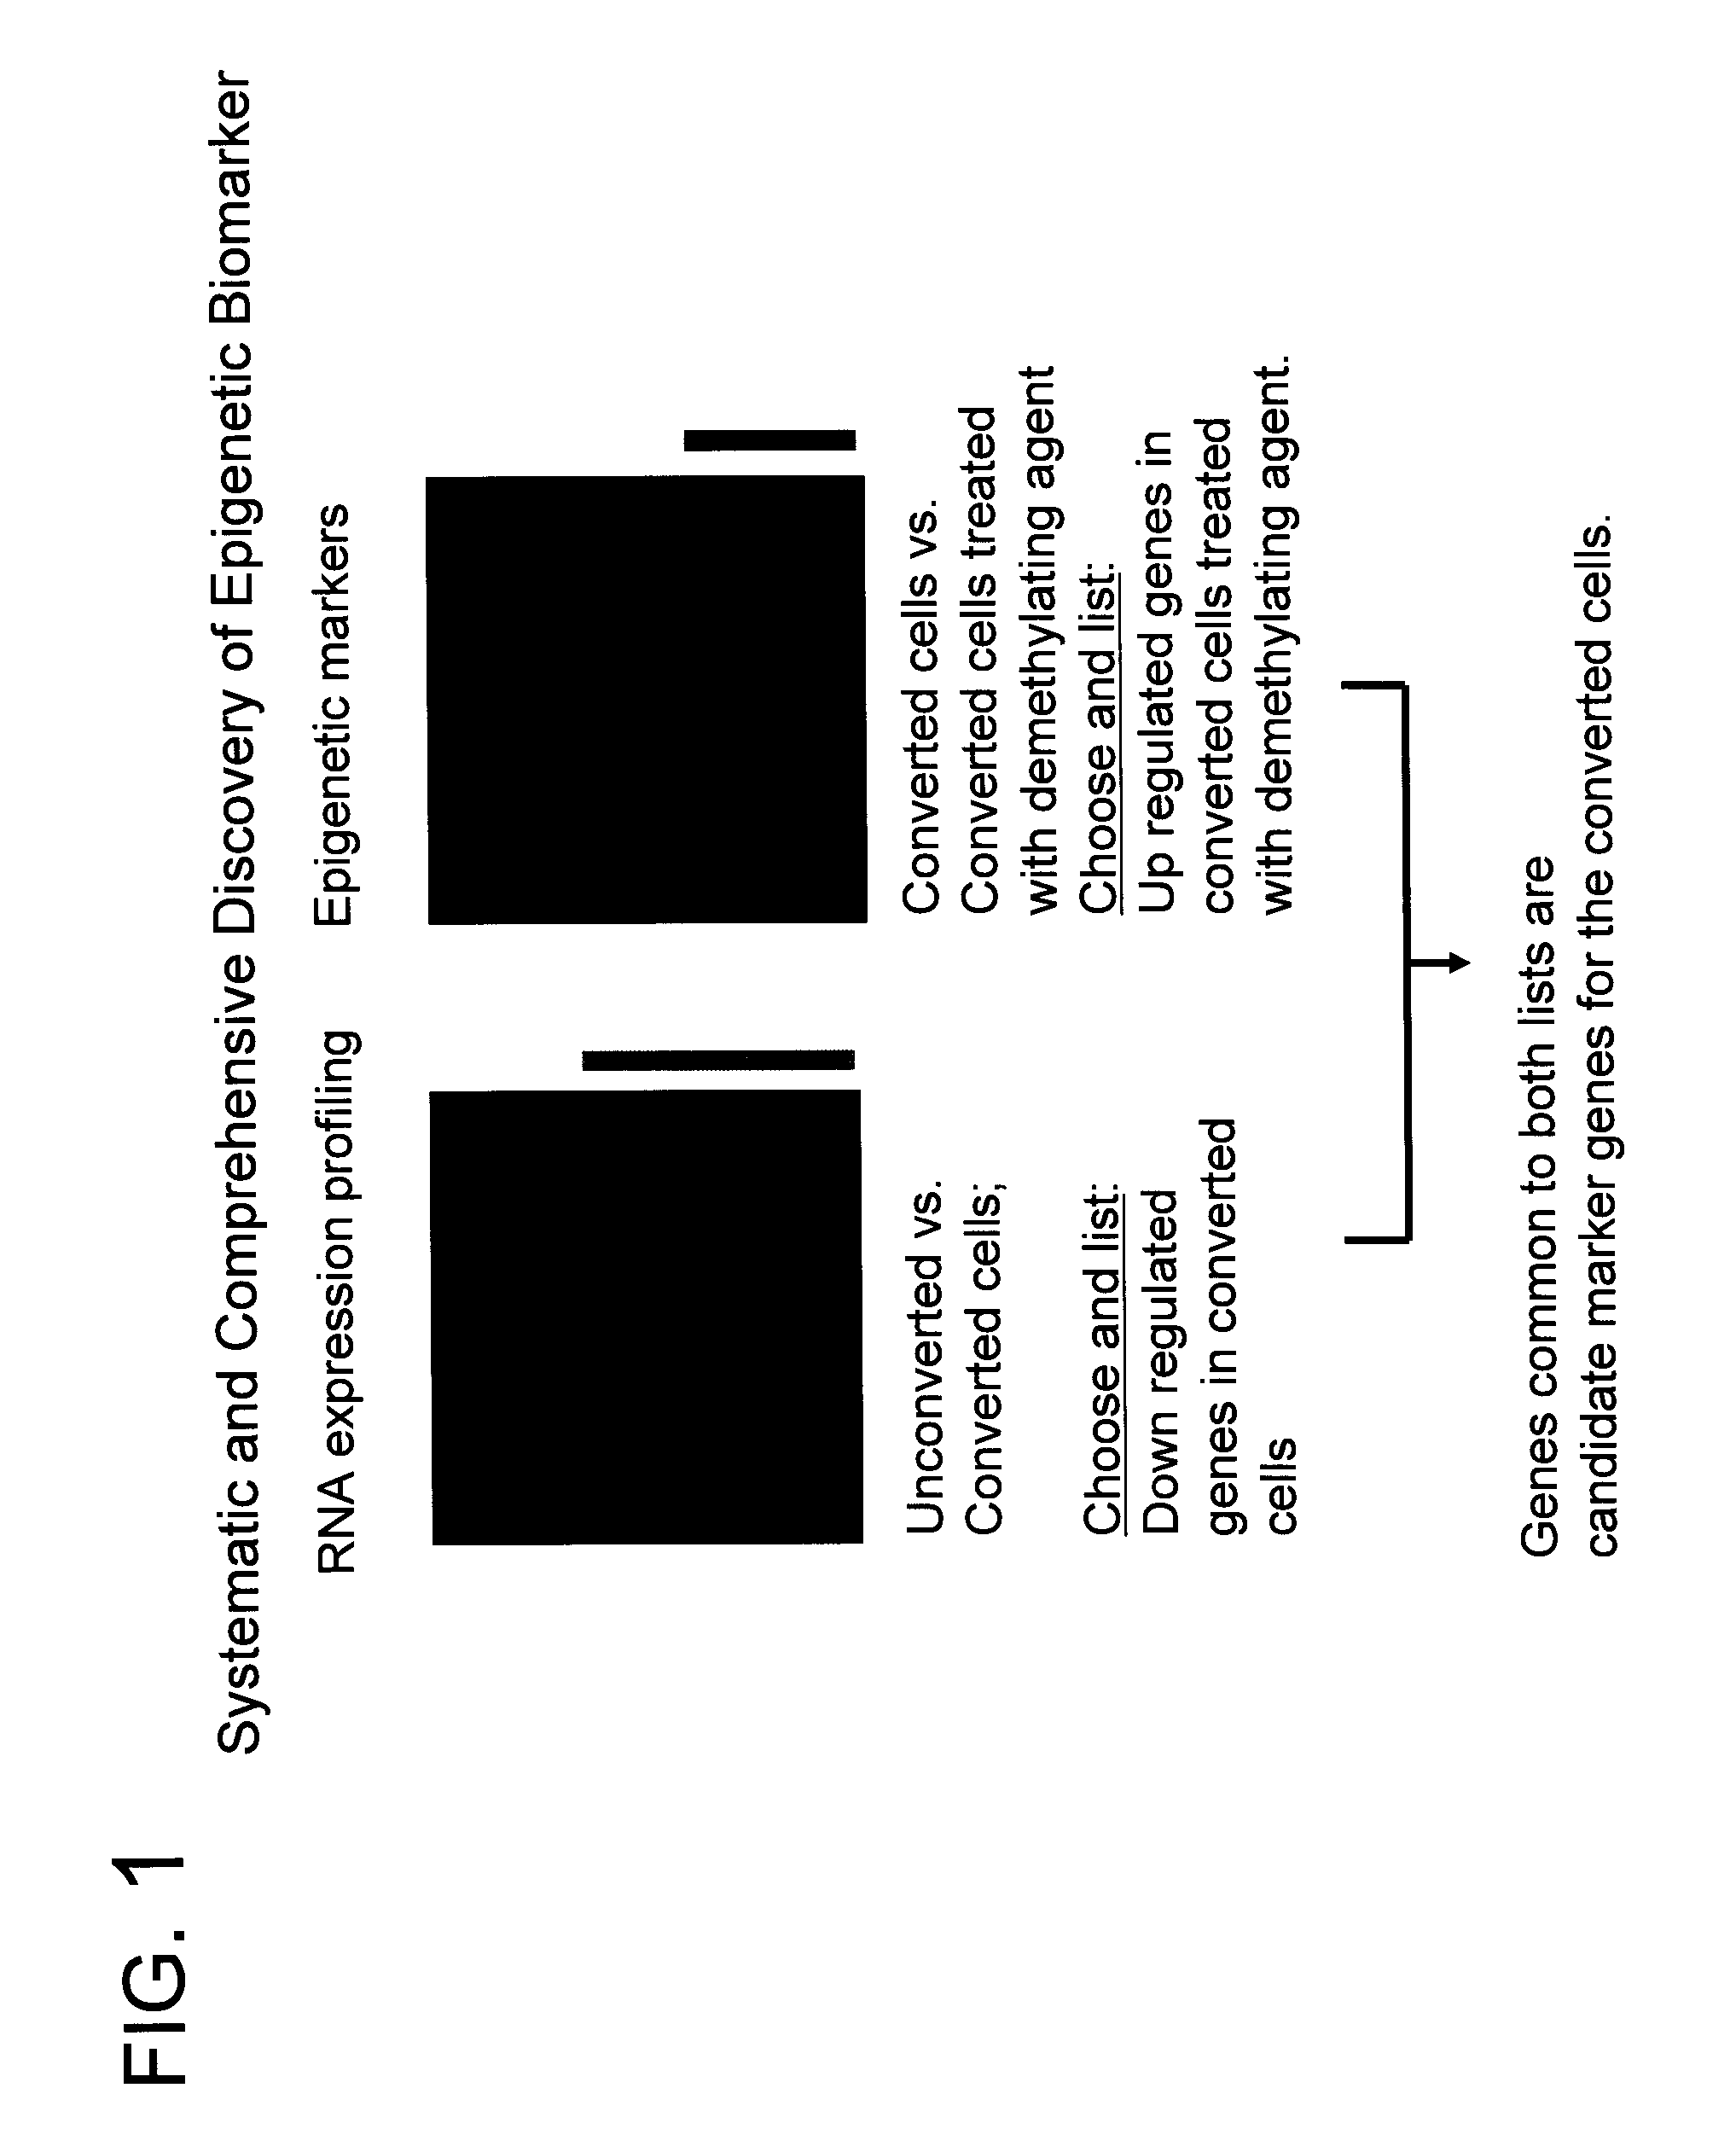 System for biomarker discovery